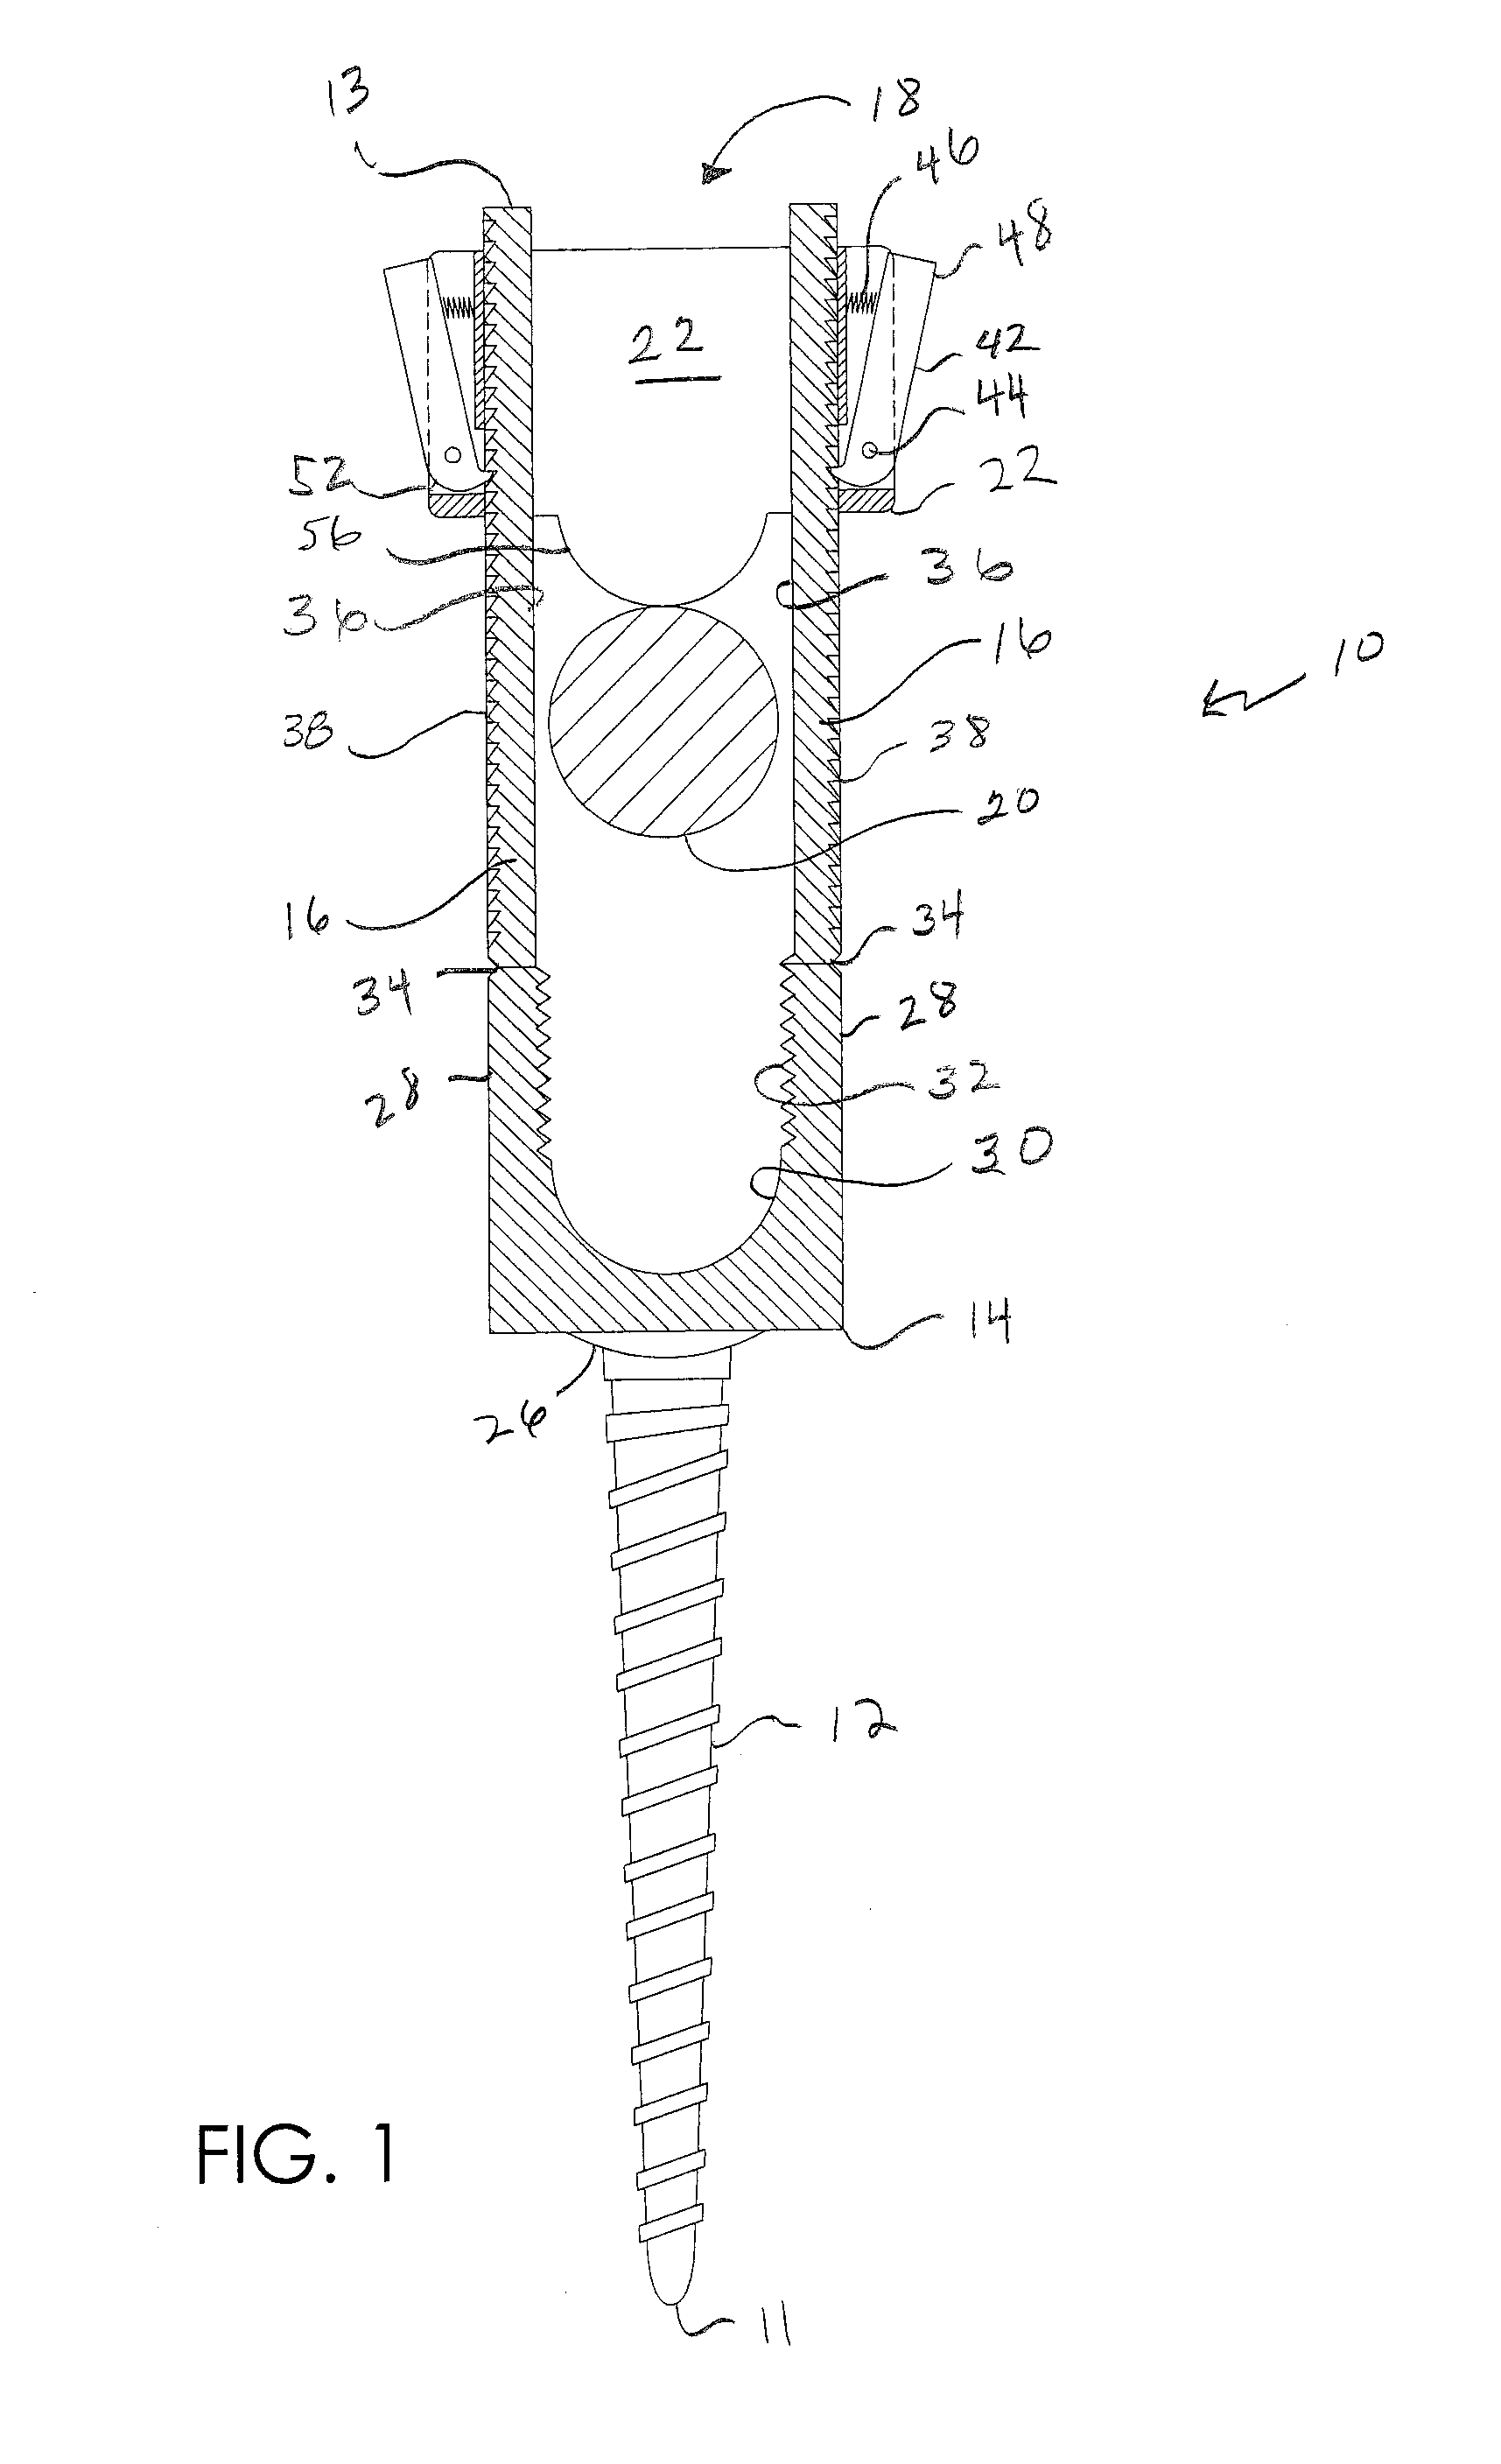 Screw and rod fixation system